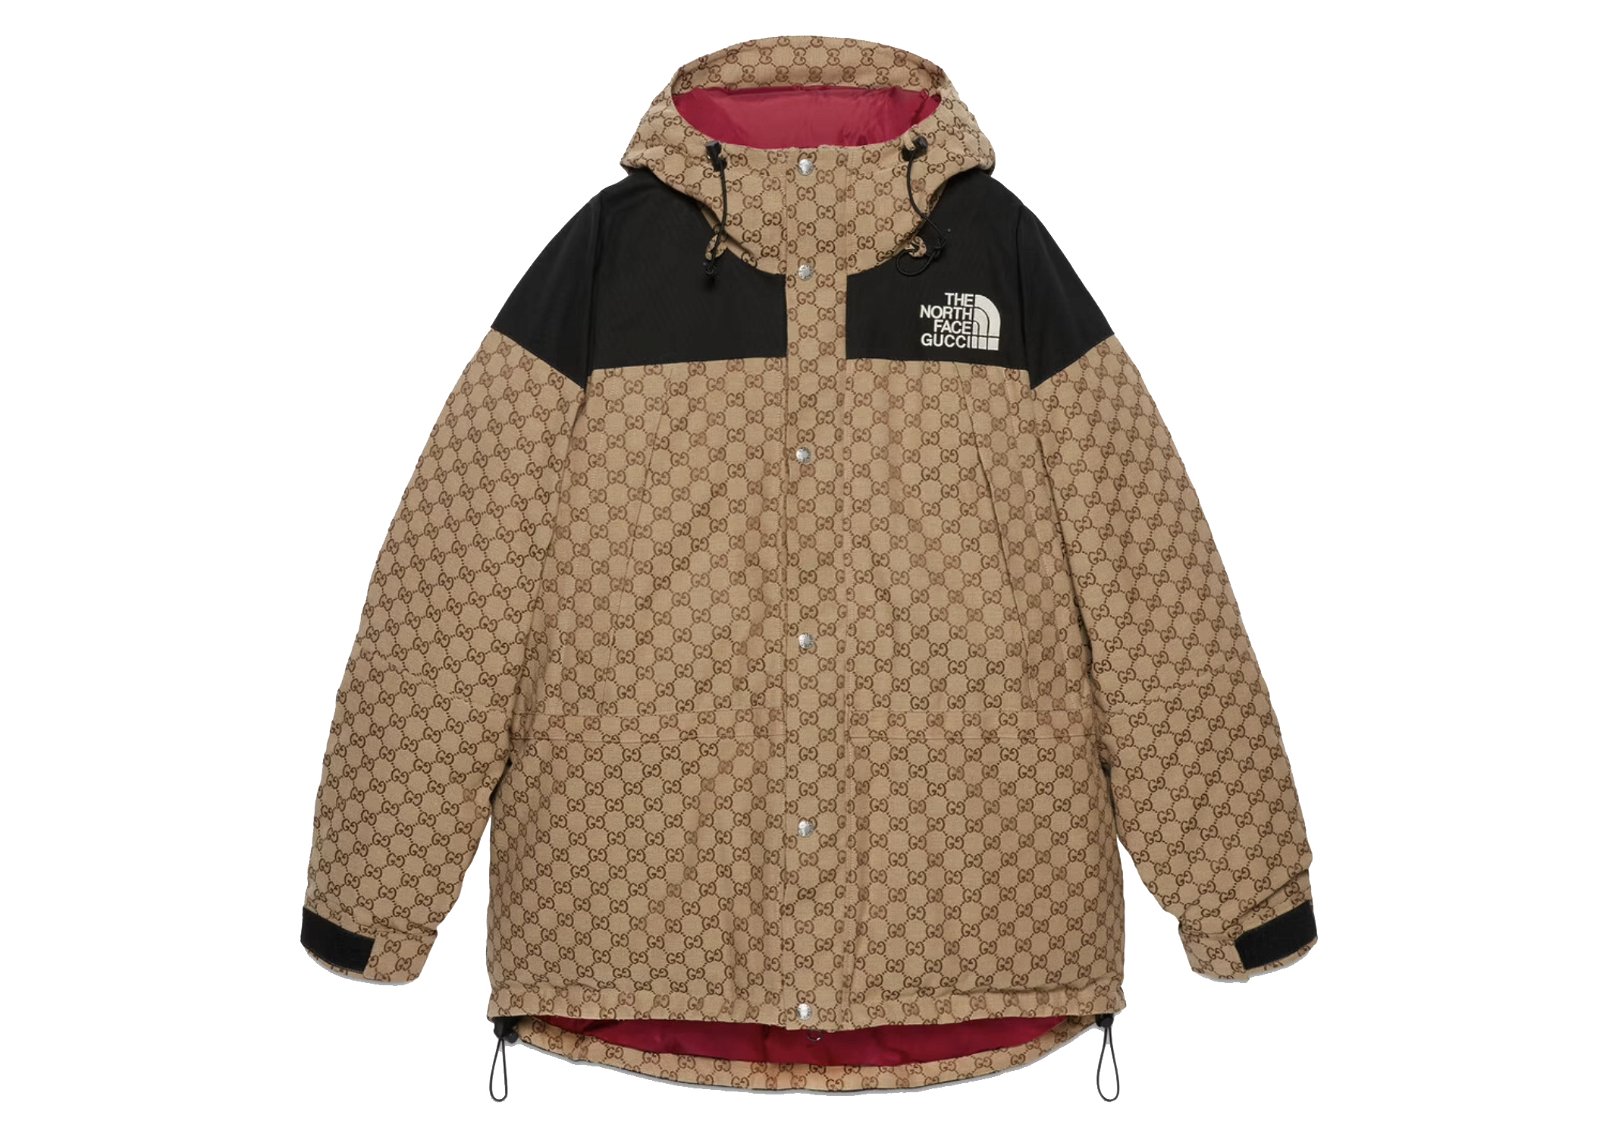 Gucci x The North Face Down Jacket Beige/Ebony sneakers